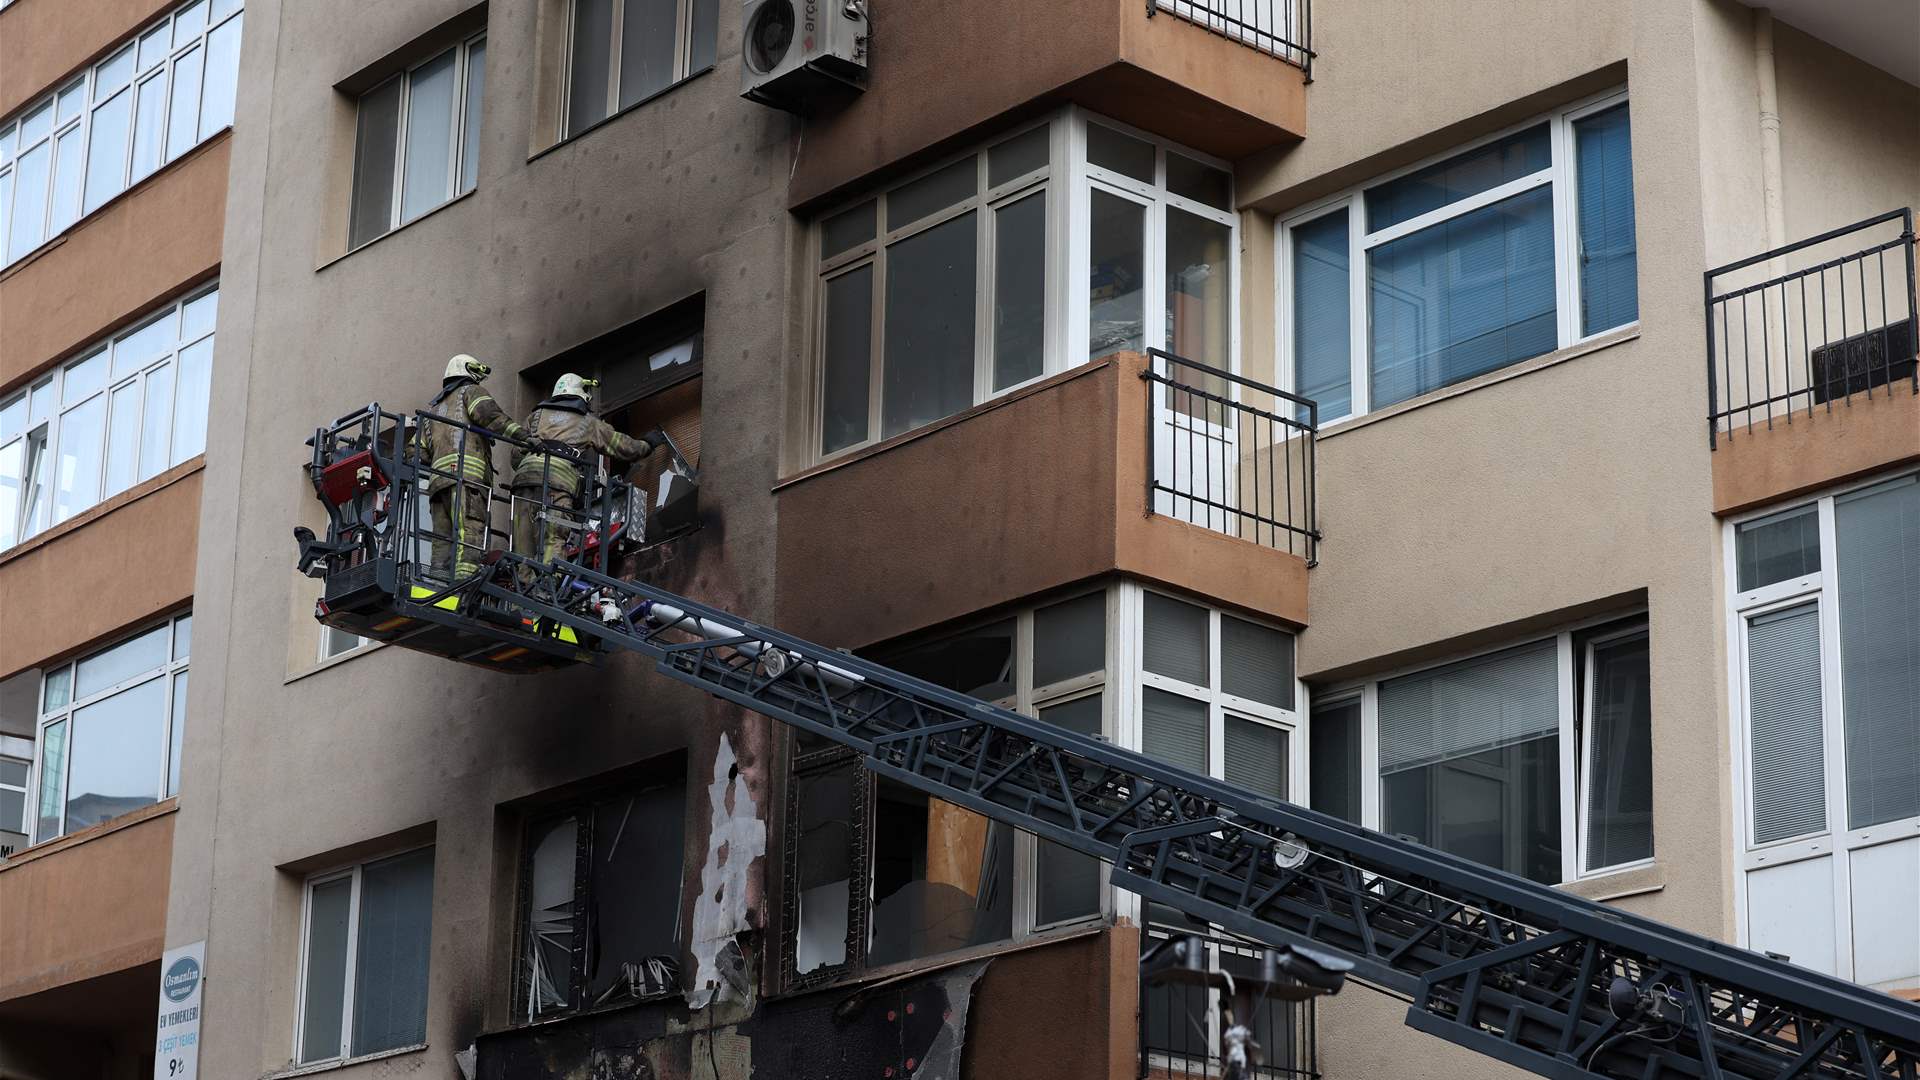 Fire kills at least 29 people at Istanbul nightclub during daytime renovations